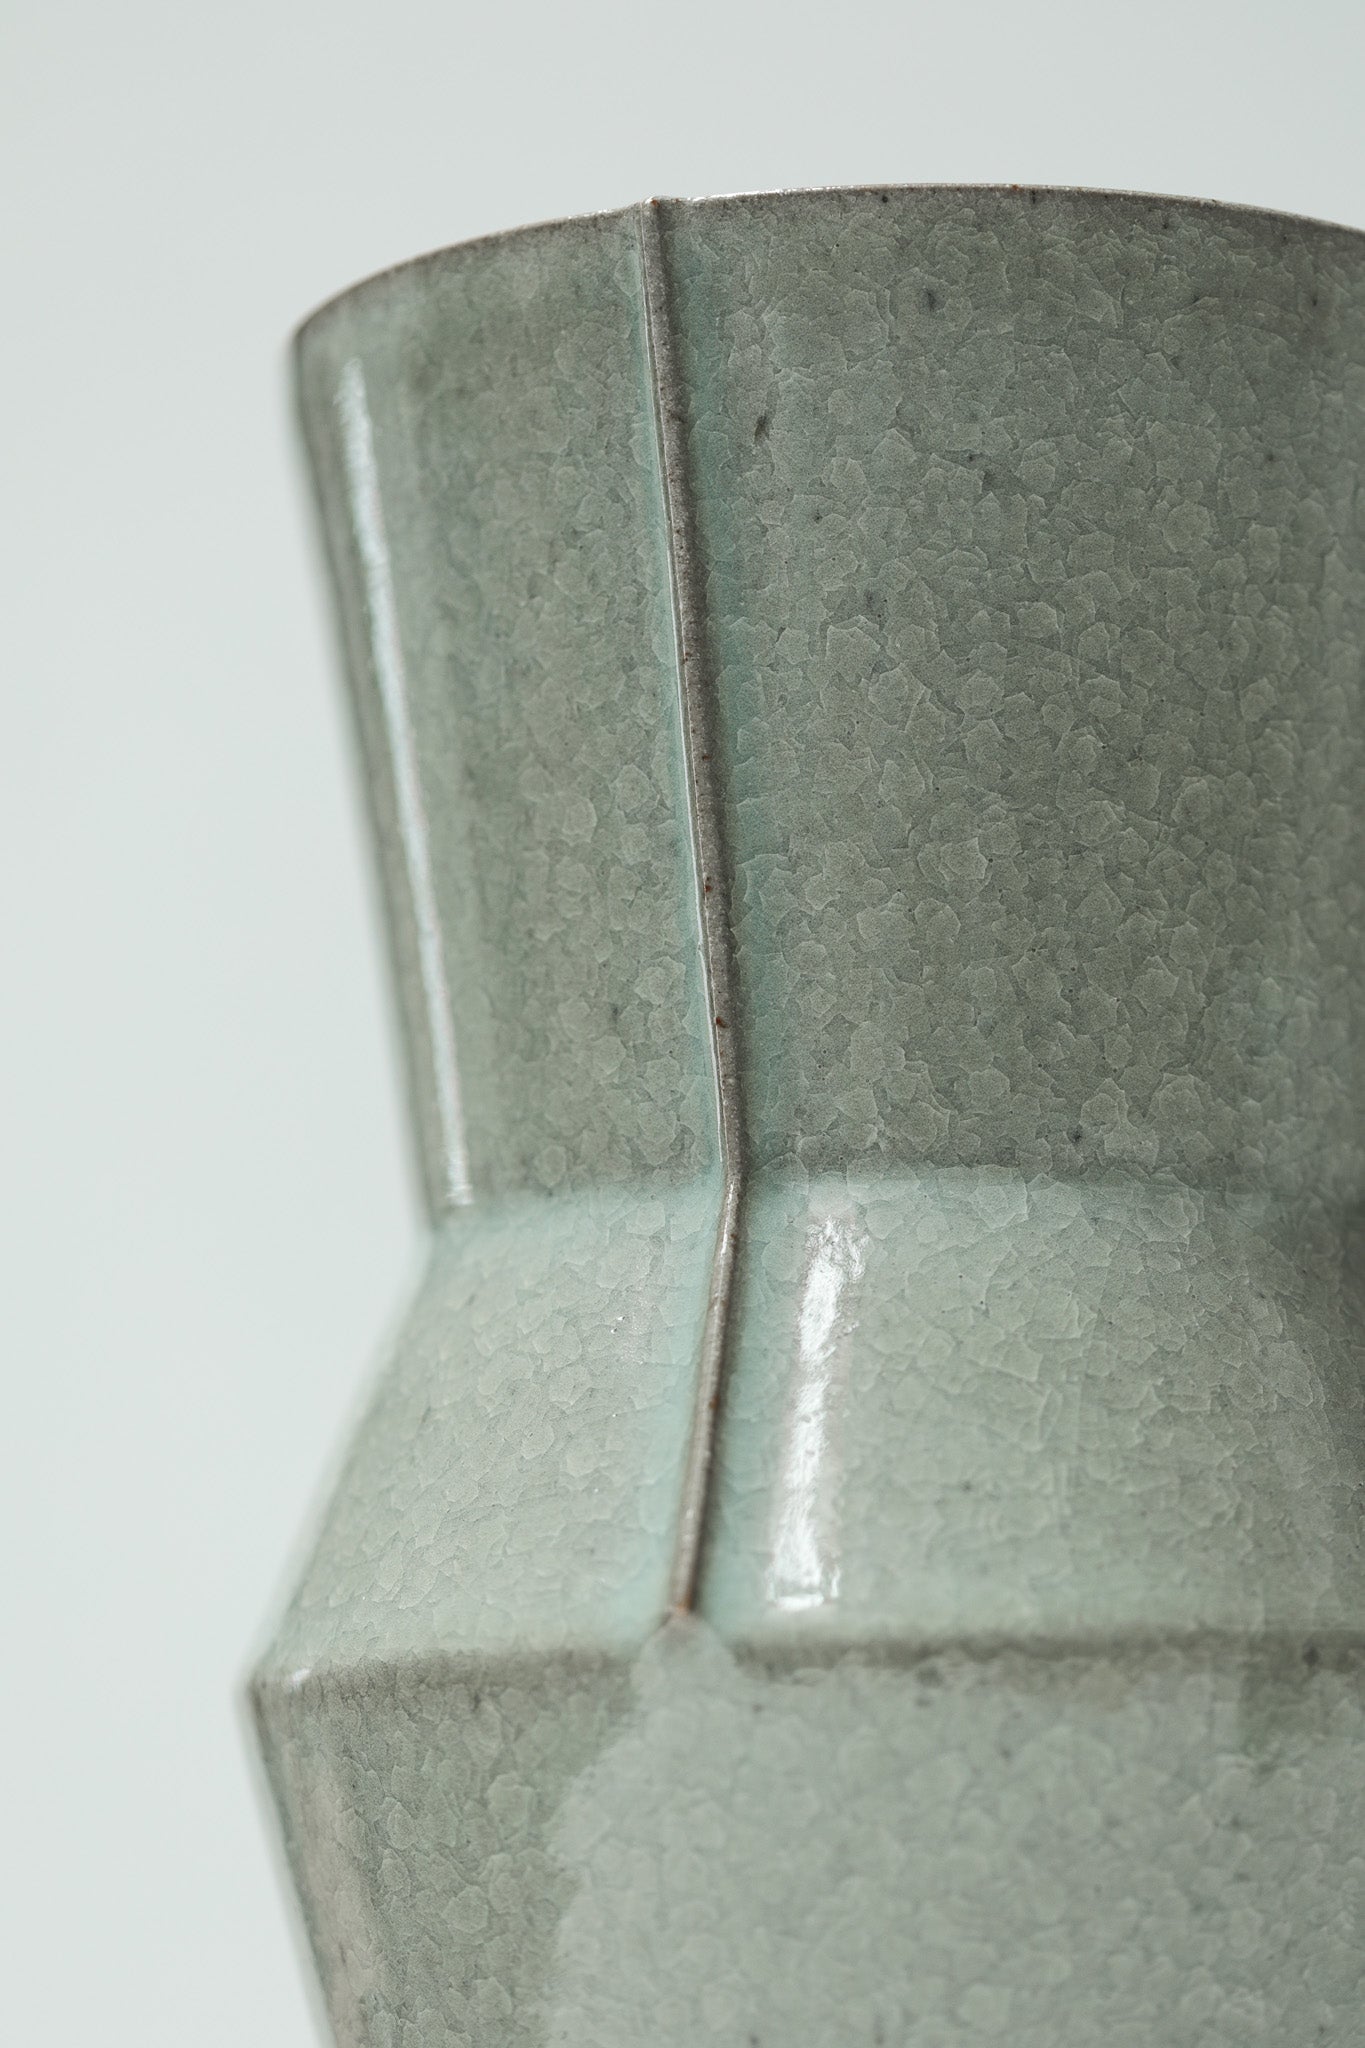 Florian Gadsby: Tall Lined Vase